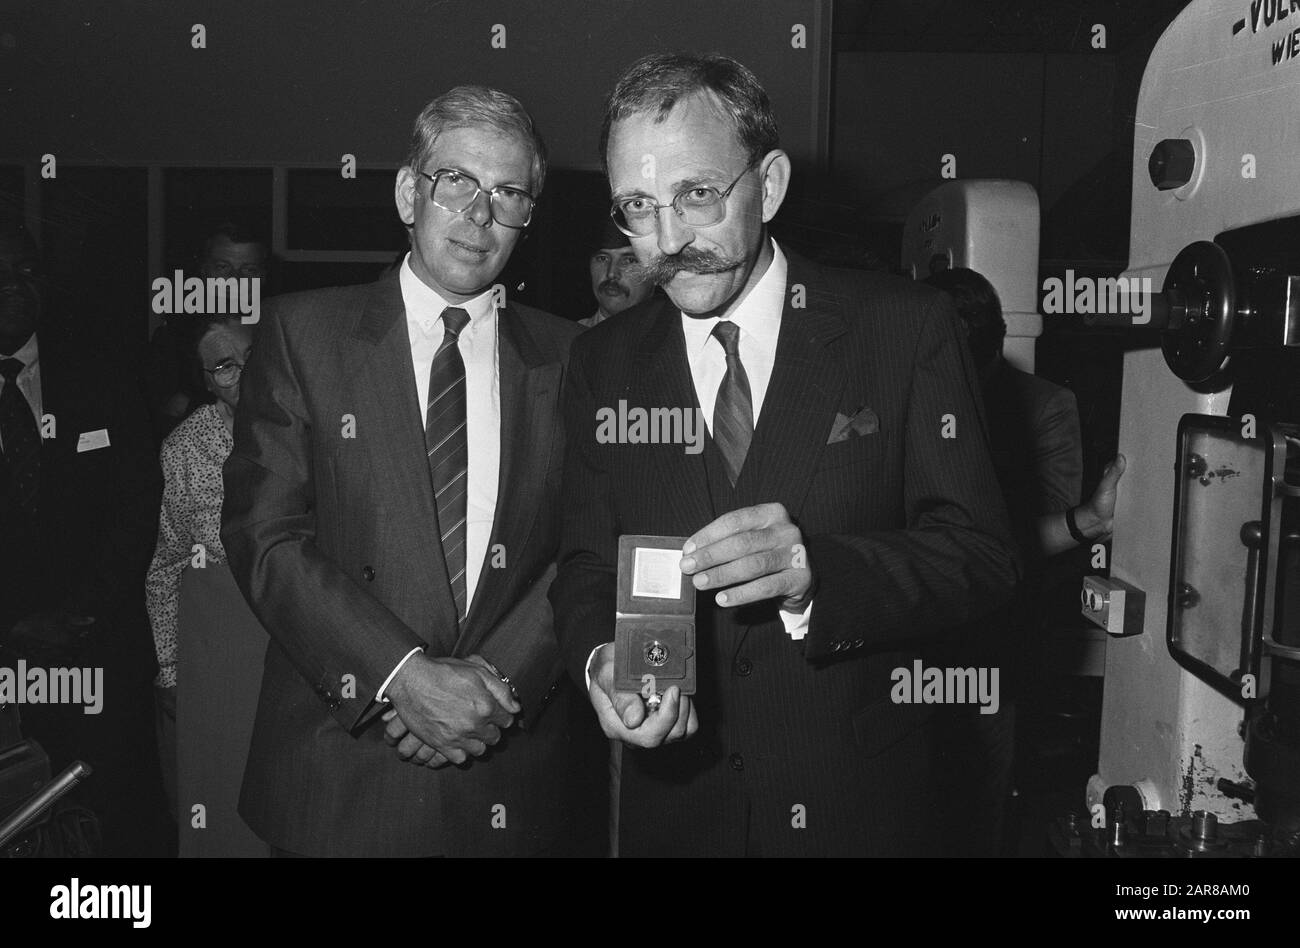 s Mint Master ir. J. de Jong (l) and theasaurier-general of Ministry of Finance C. Maas with first golden jubilee dukaat 1986/Date: August 20, 1986 Keywords: ducats, anniversaries Personal name: C. Maas Stock Photo